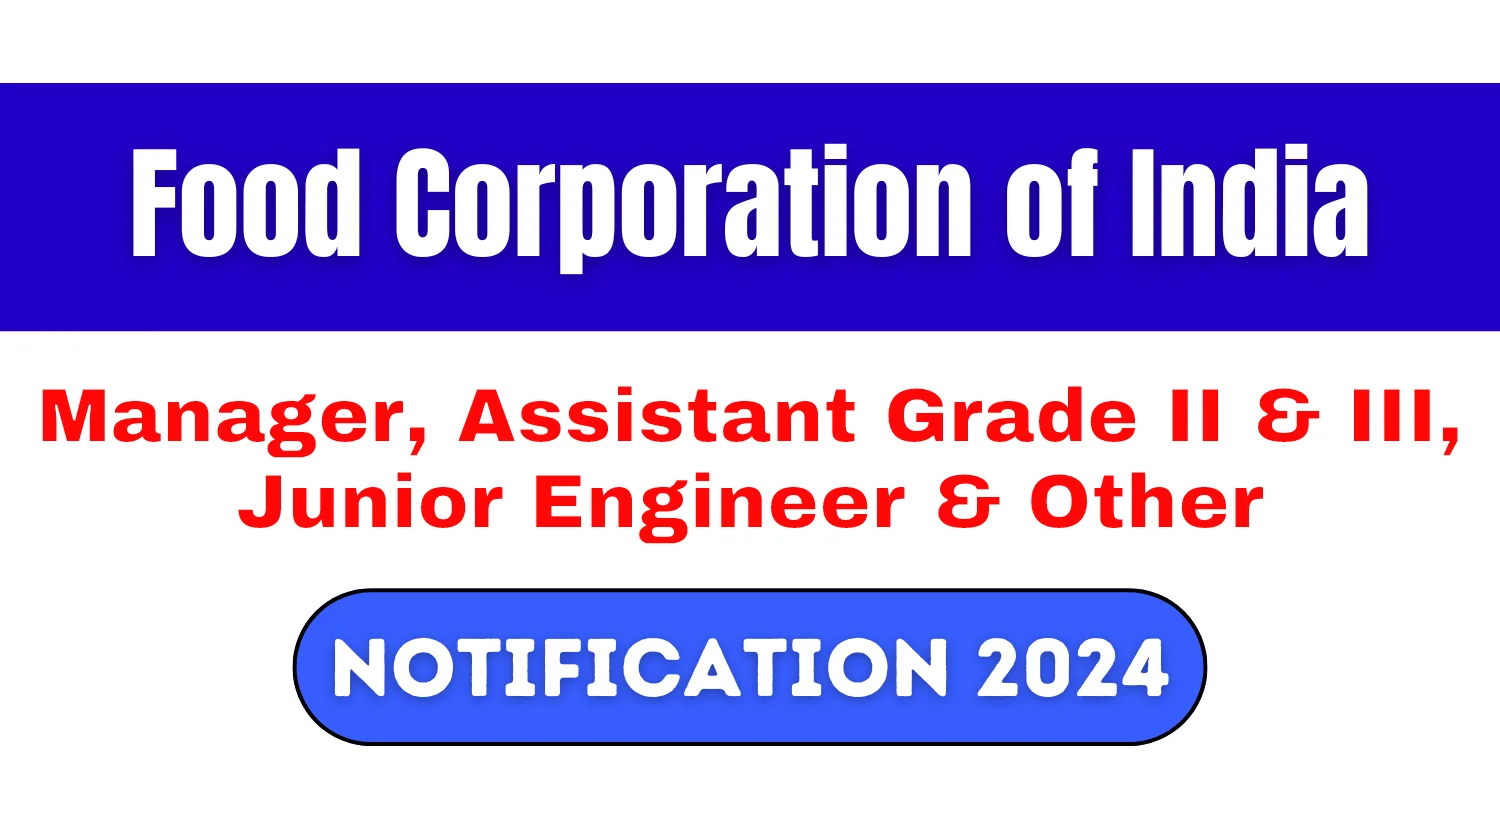 FCI Recruitment 2024 Notification for Manager, Assistant Grade II & III, Junior Engineer and Others, Check Details Now